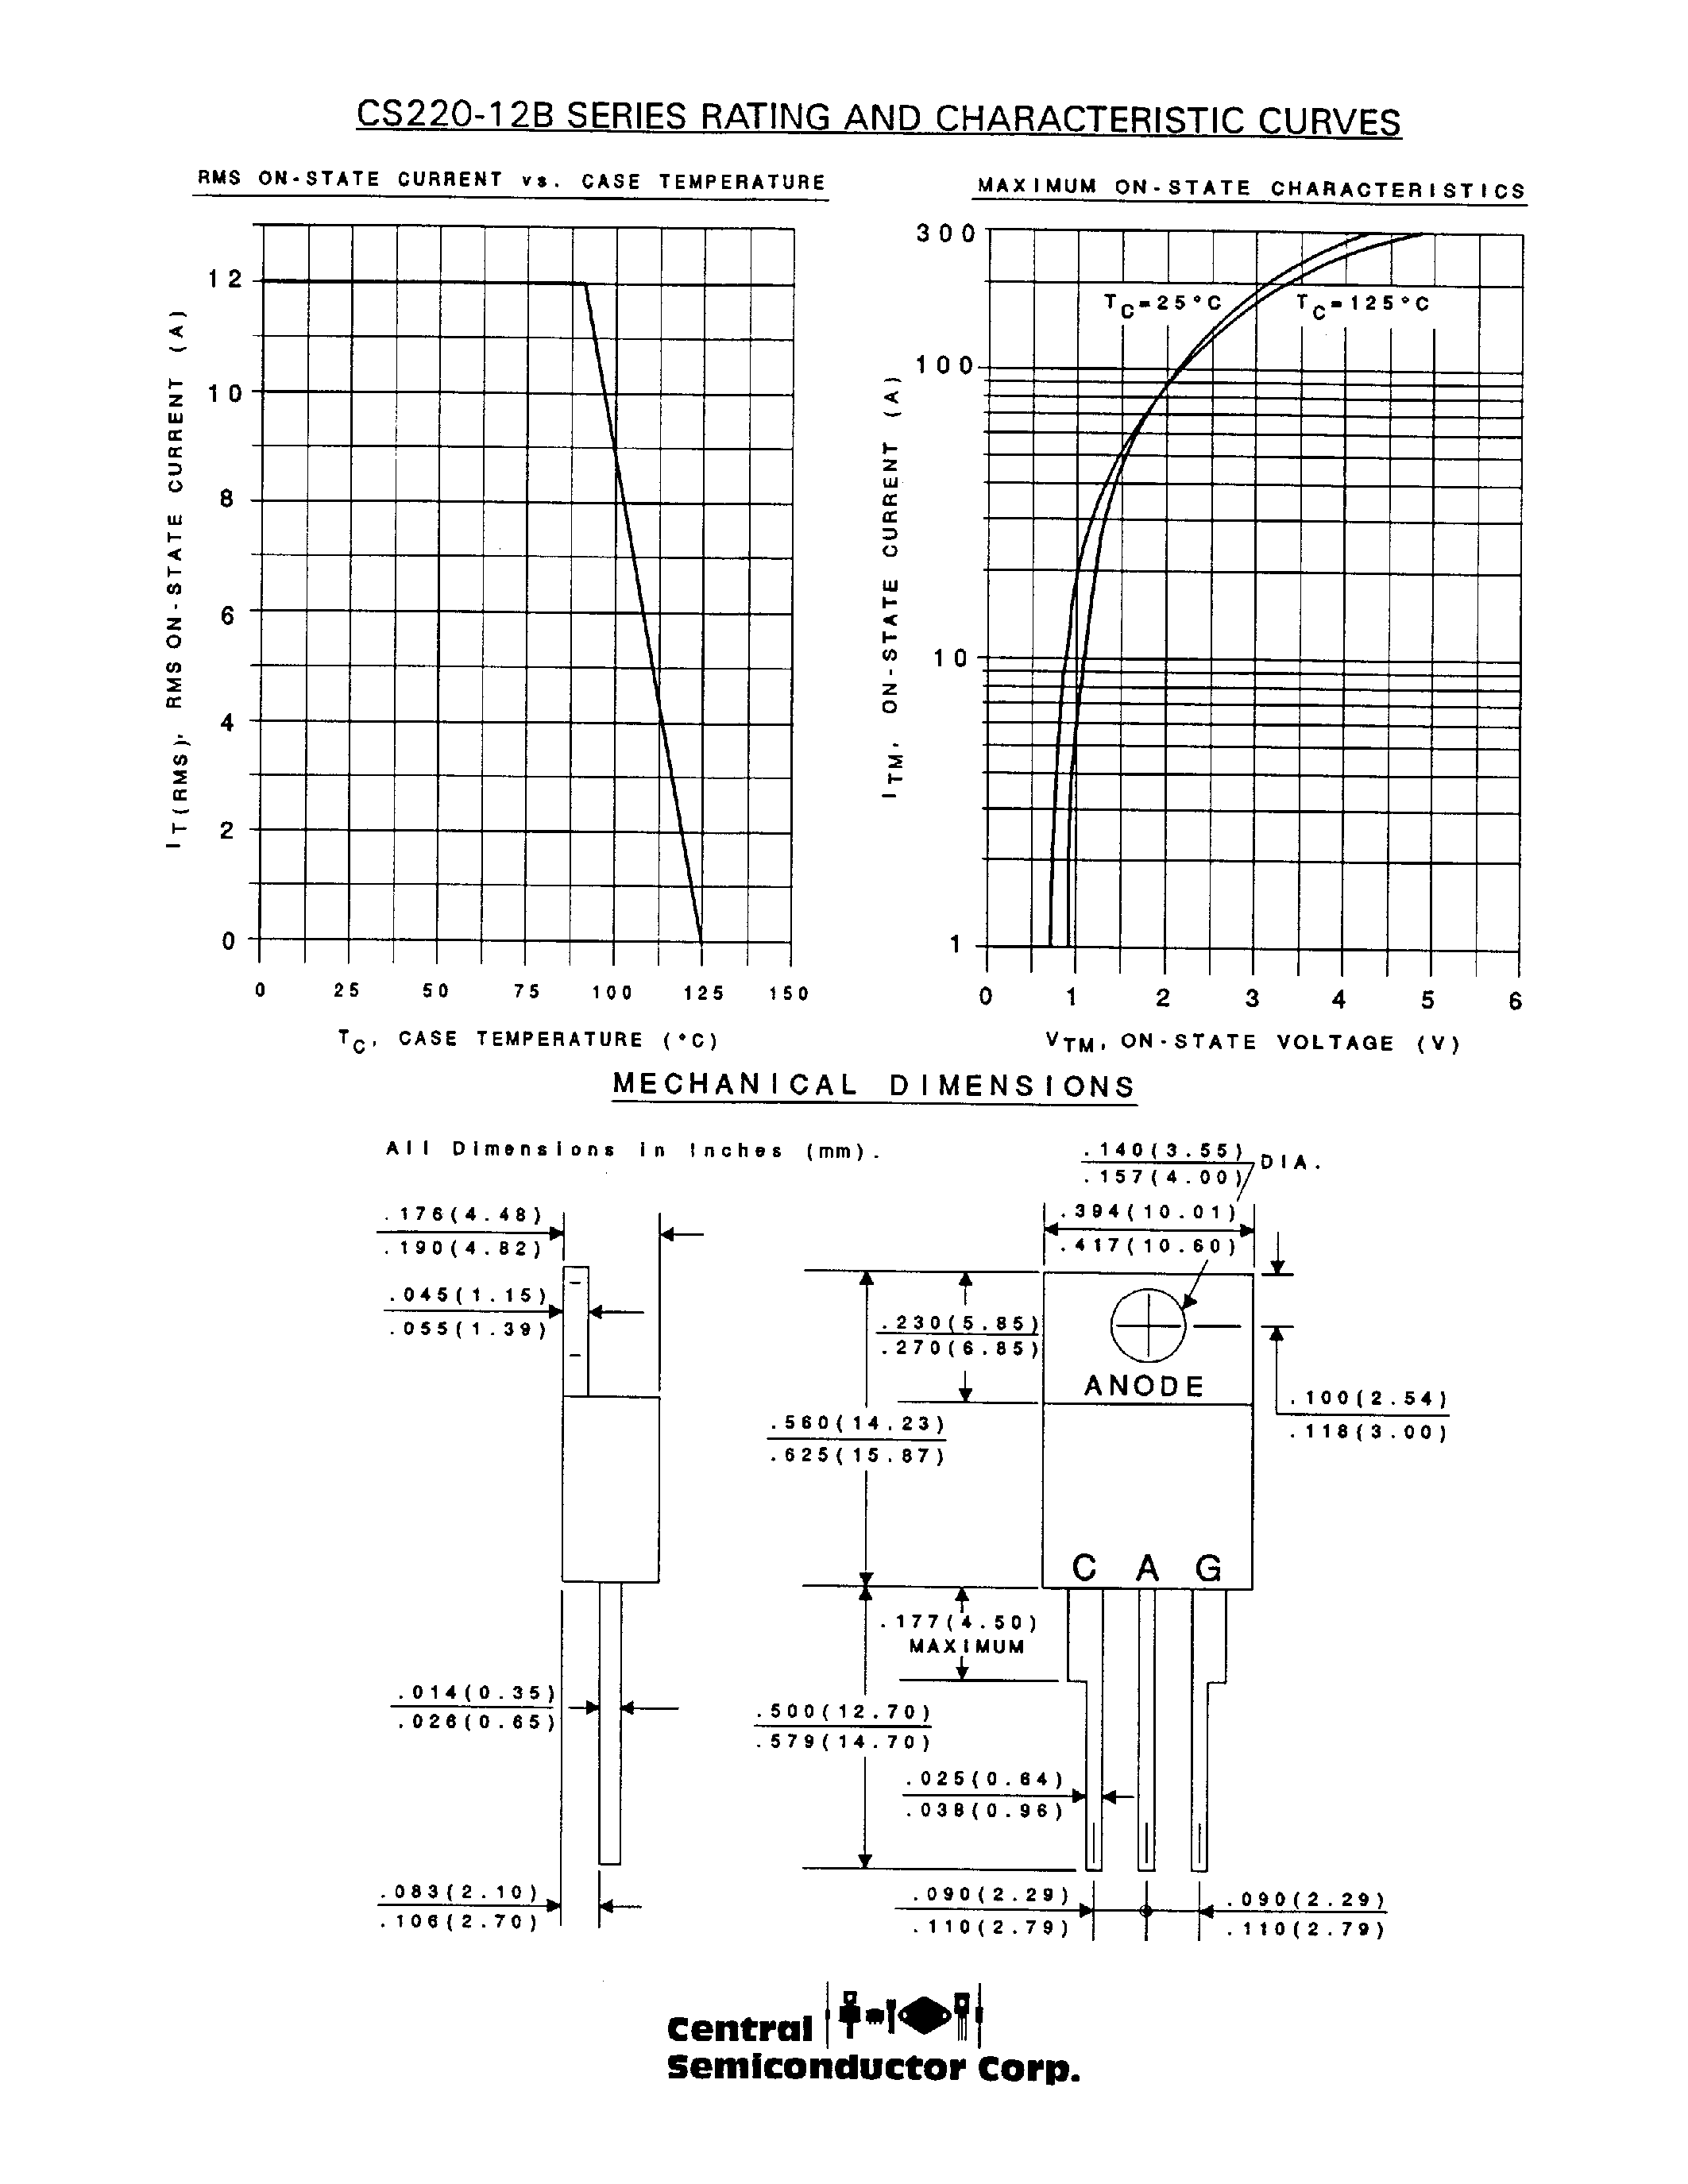 Datasheet CS220-12M - SILICON CONTROLLED RECTIFIER 12 AMP/ 200 THRU 1000 VOLTS page 2